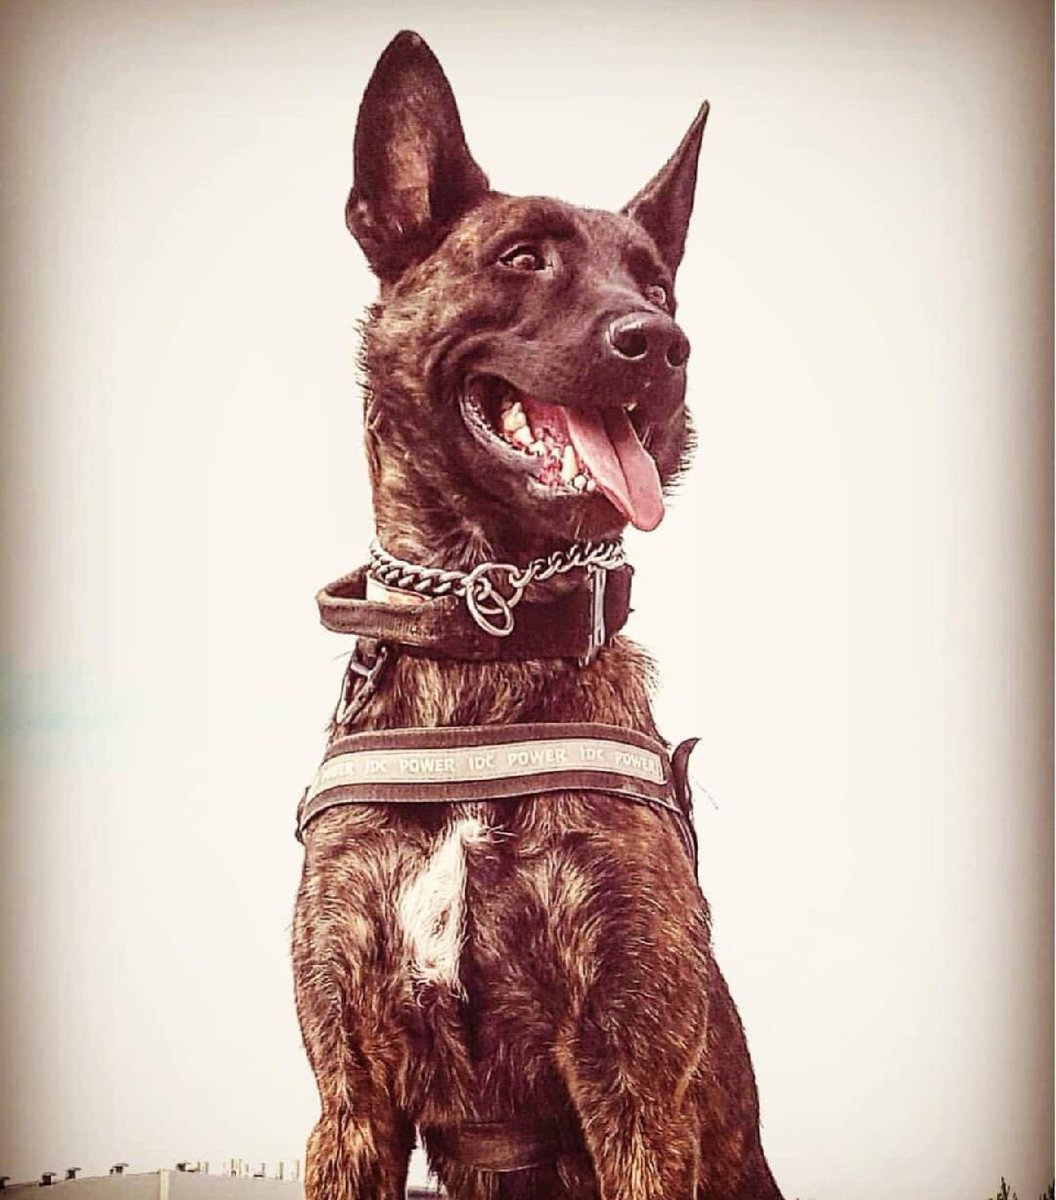 🍰Happy Birthday 🍰
A BIG Happy Birthday Wish goes out to PSD Hawk.
🎉PSD Hawk turns 2 Yrs old Today!🎉
Please feel free to send us your Happy Birthday wishes!
Happy Birthday Big Fella!
#HAPPYBIRTHDAY
#K9leadstheway